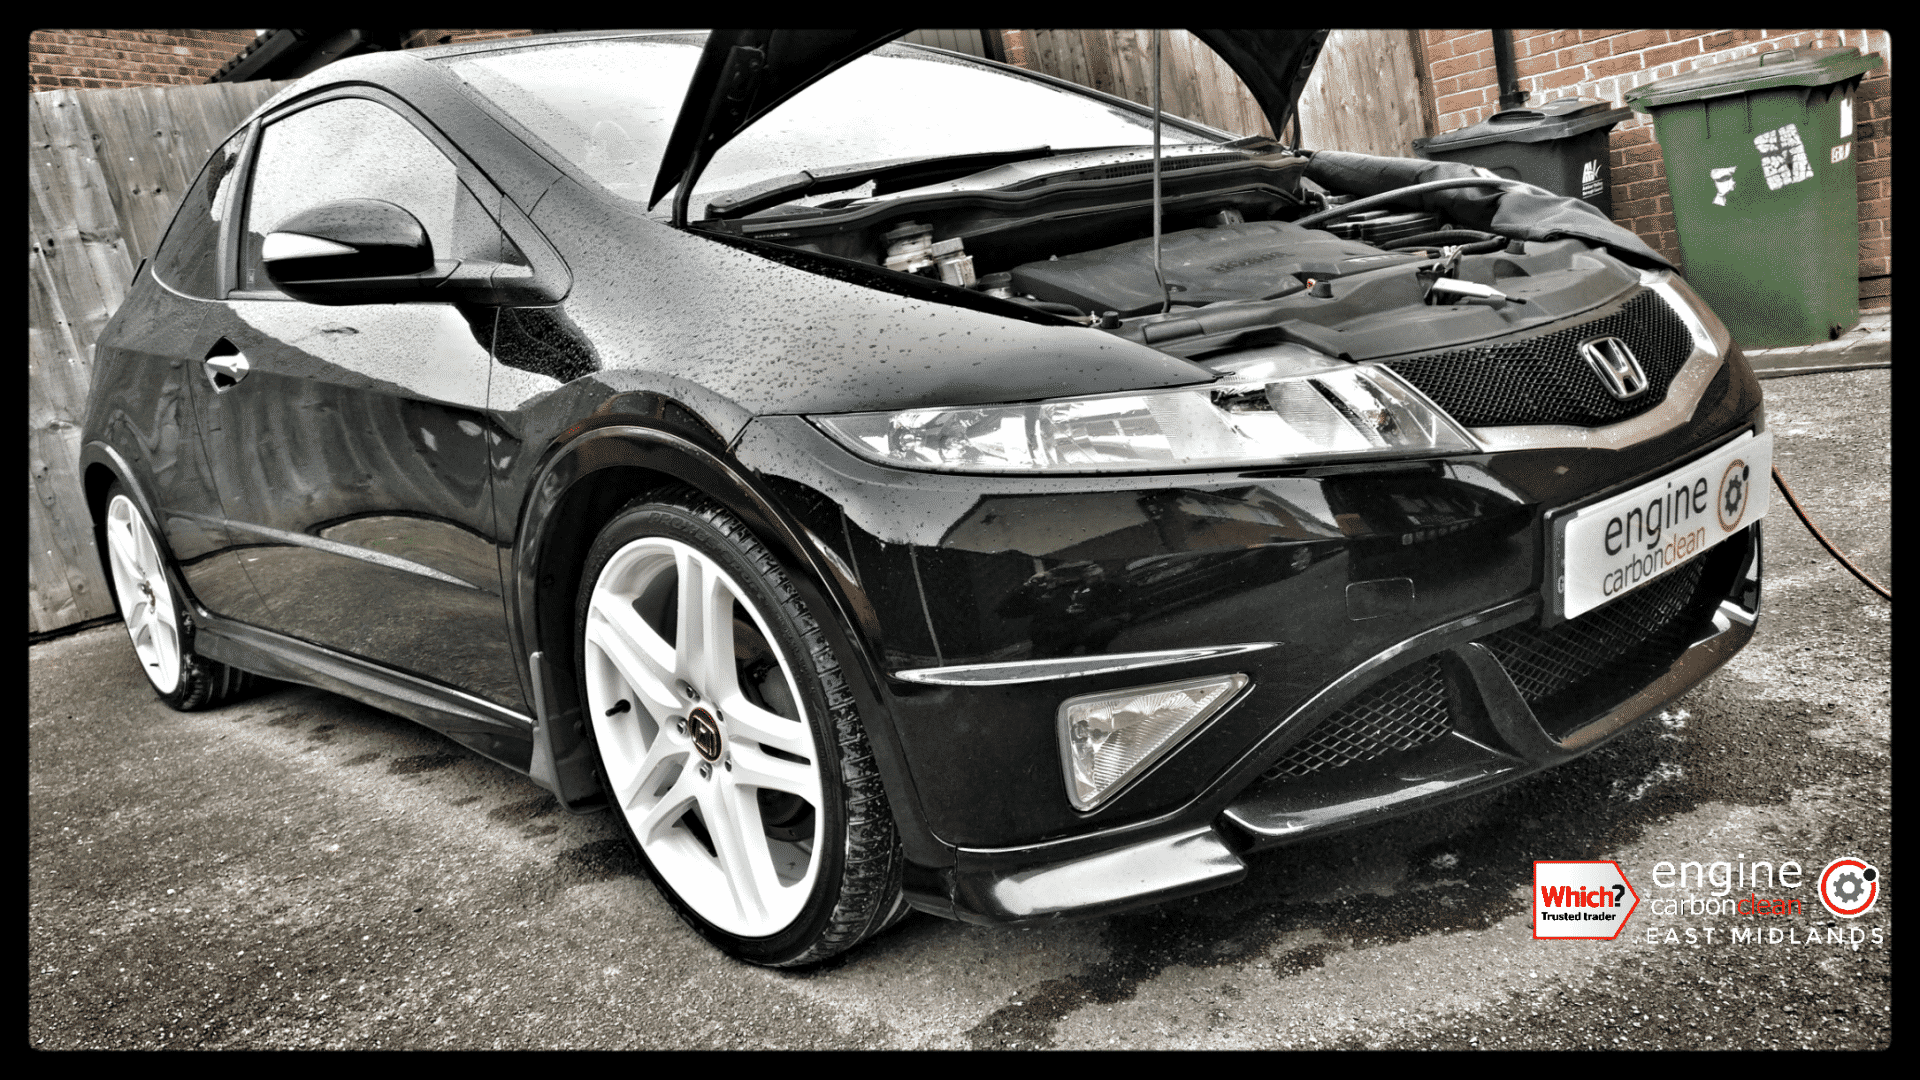 Diagnostic Consultation and Engine Carbon Clean on a Honda Civic Type S 2.2 GT-T Diesel (2012 - 82,605 miles)